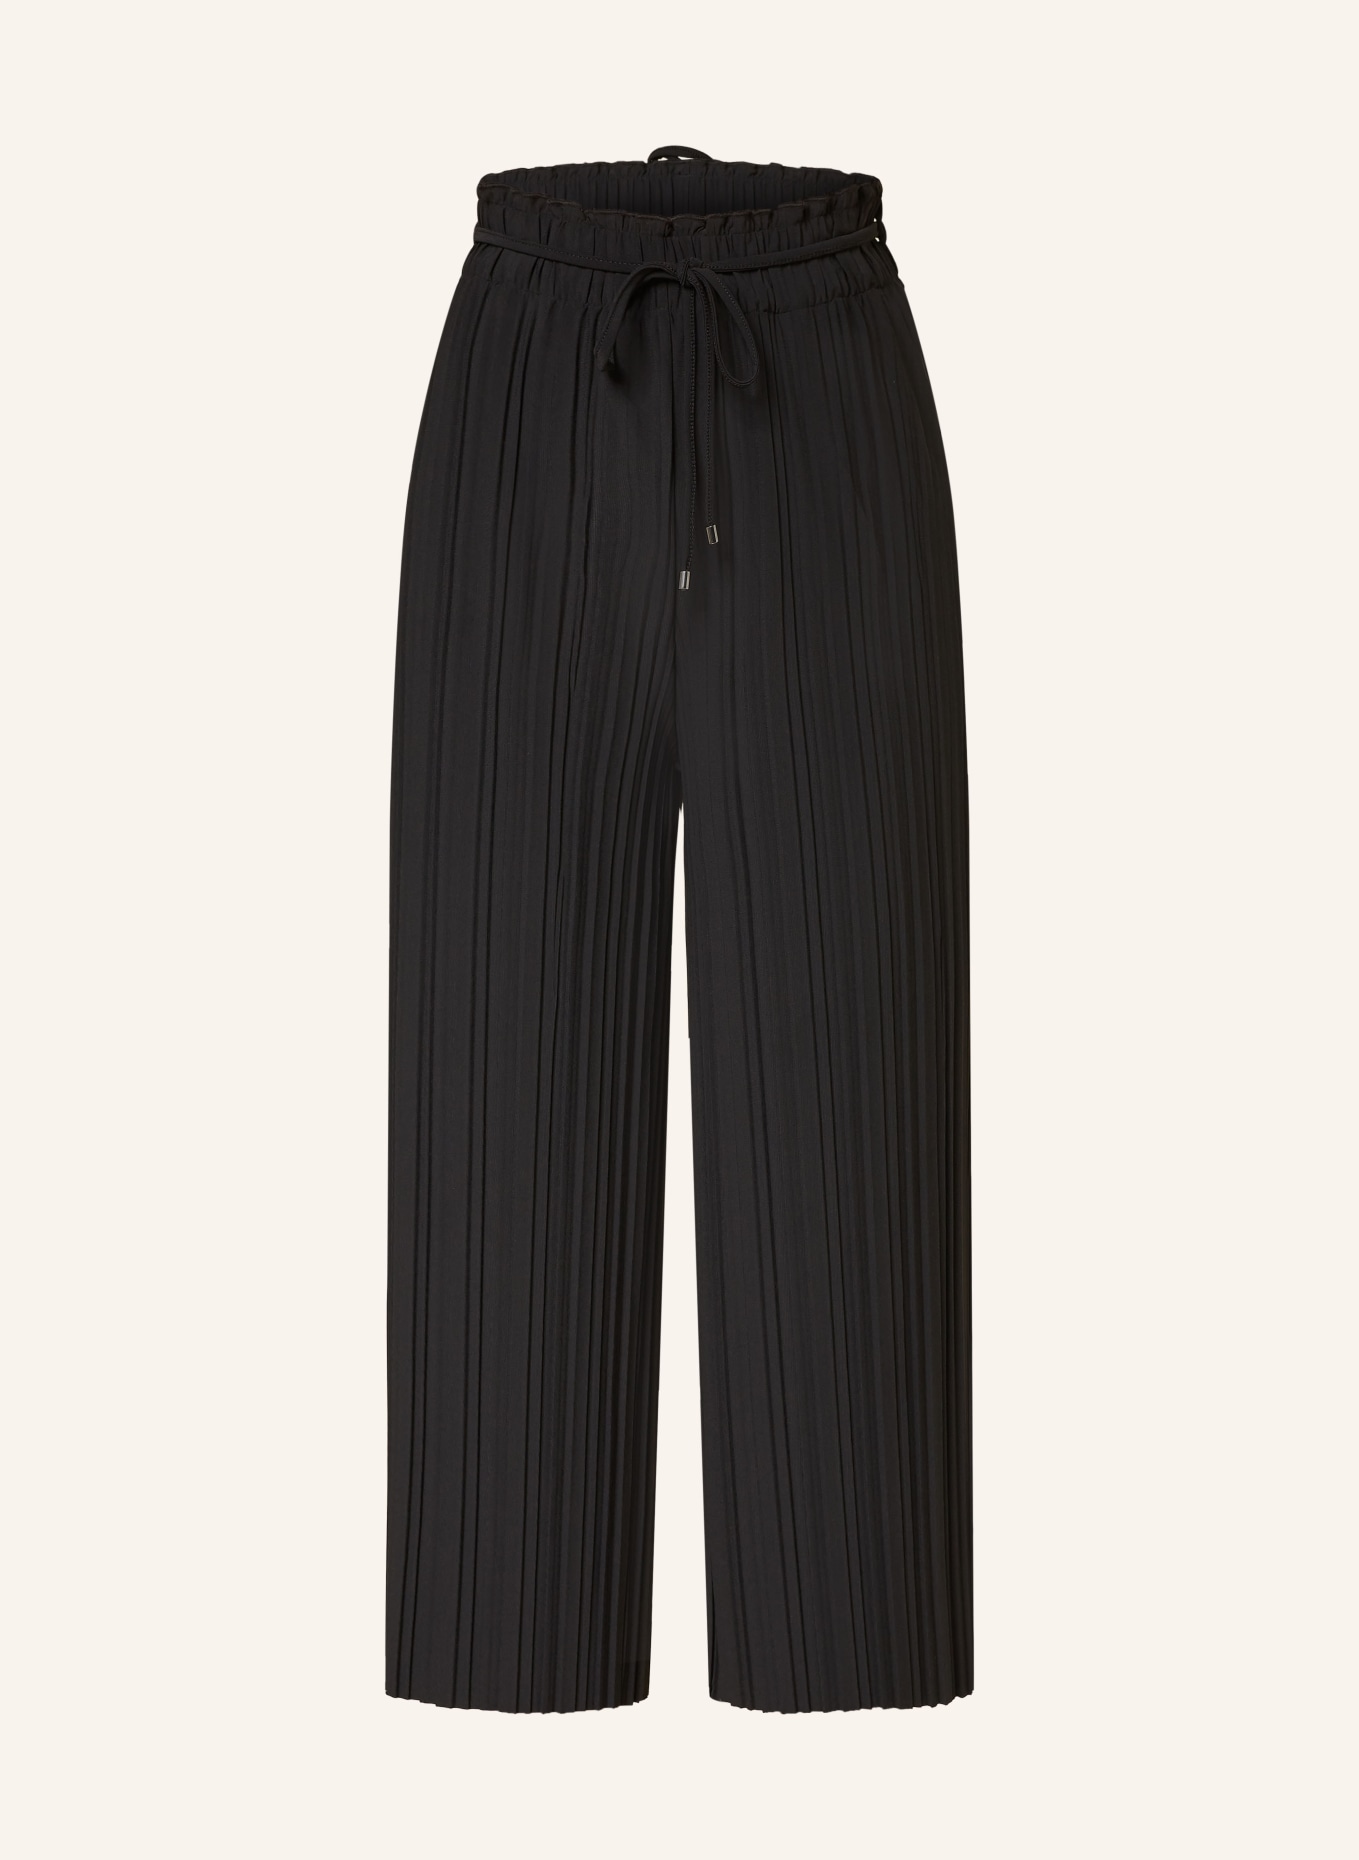 s.Oliver BLACK LABEL 7/8 pleated trousers, Color: BLACK (Image 1)